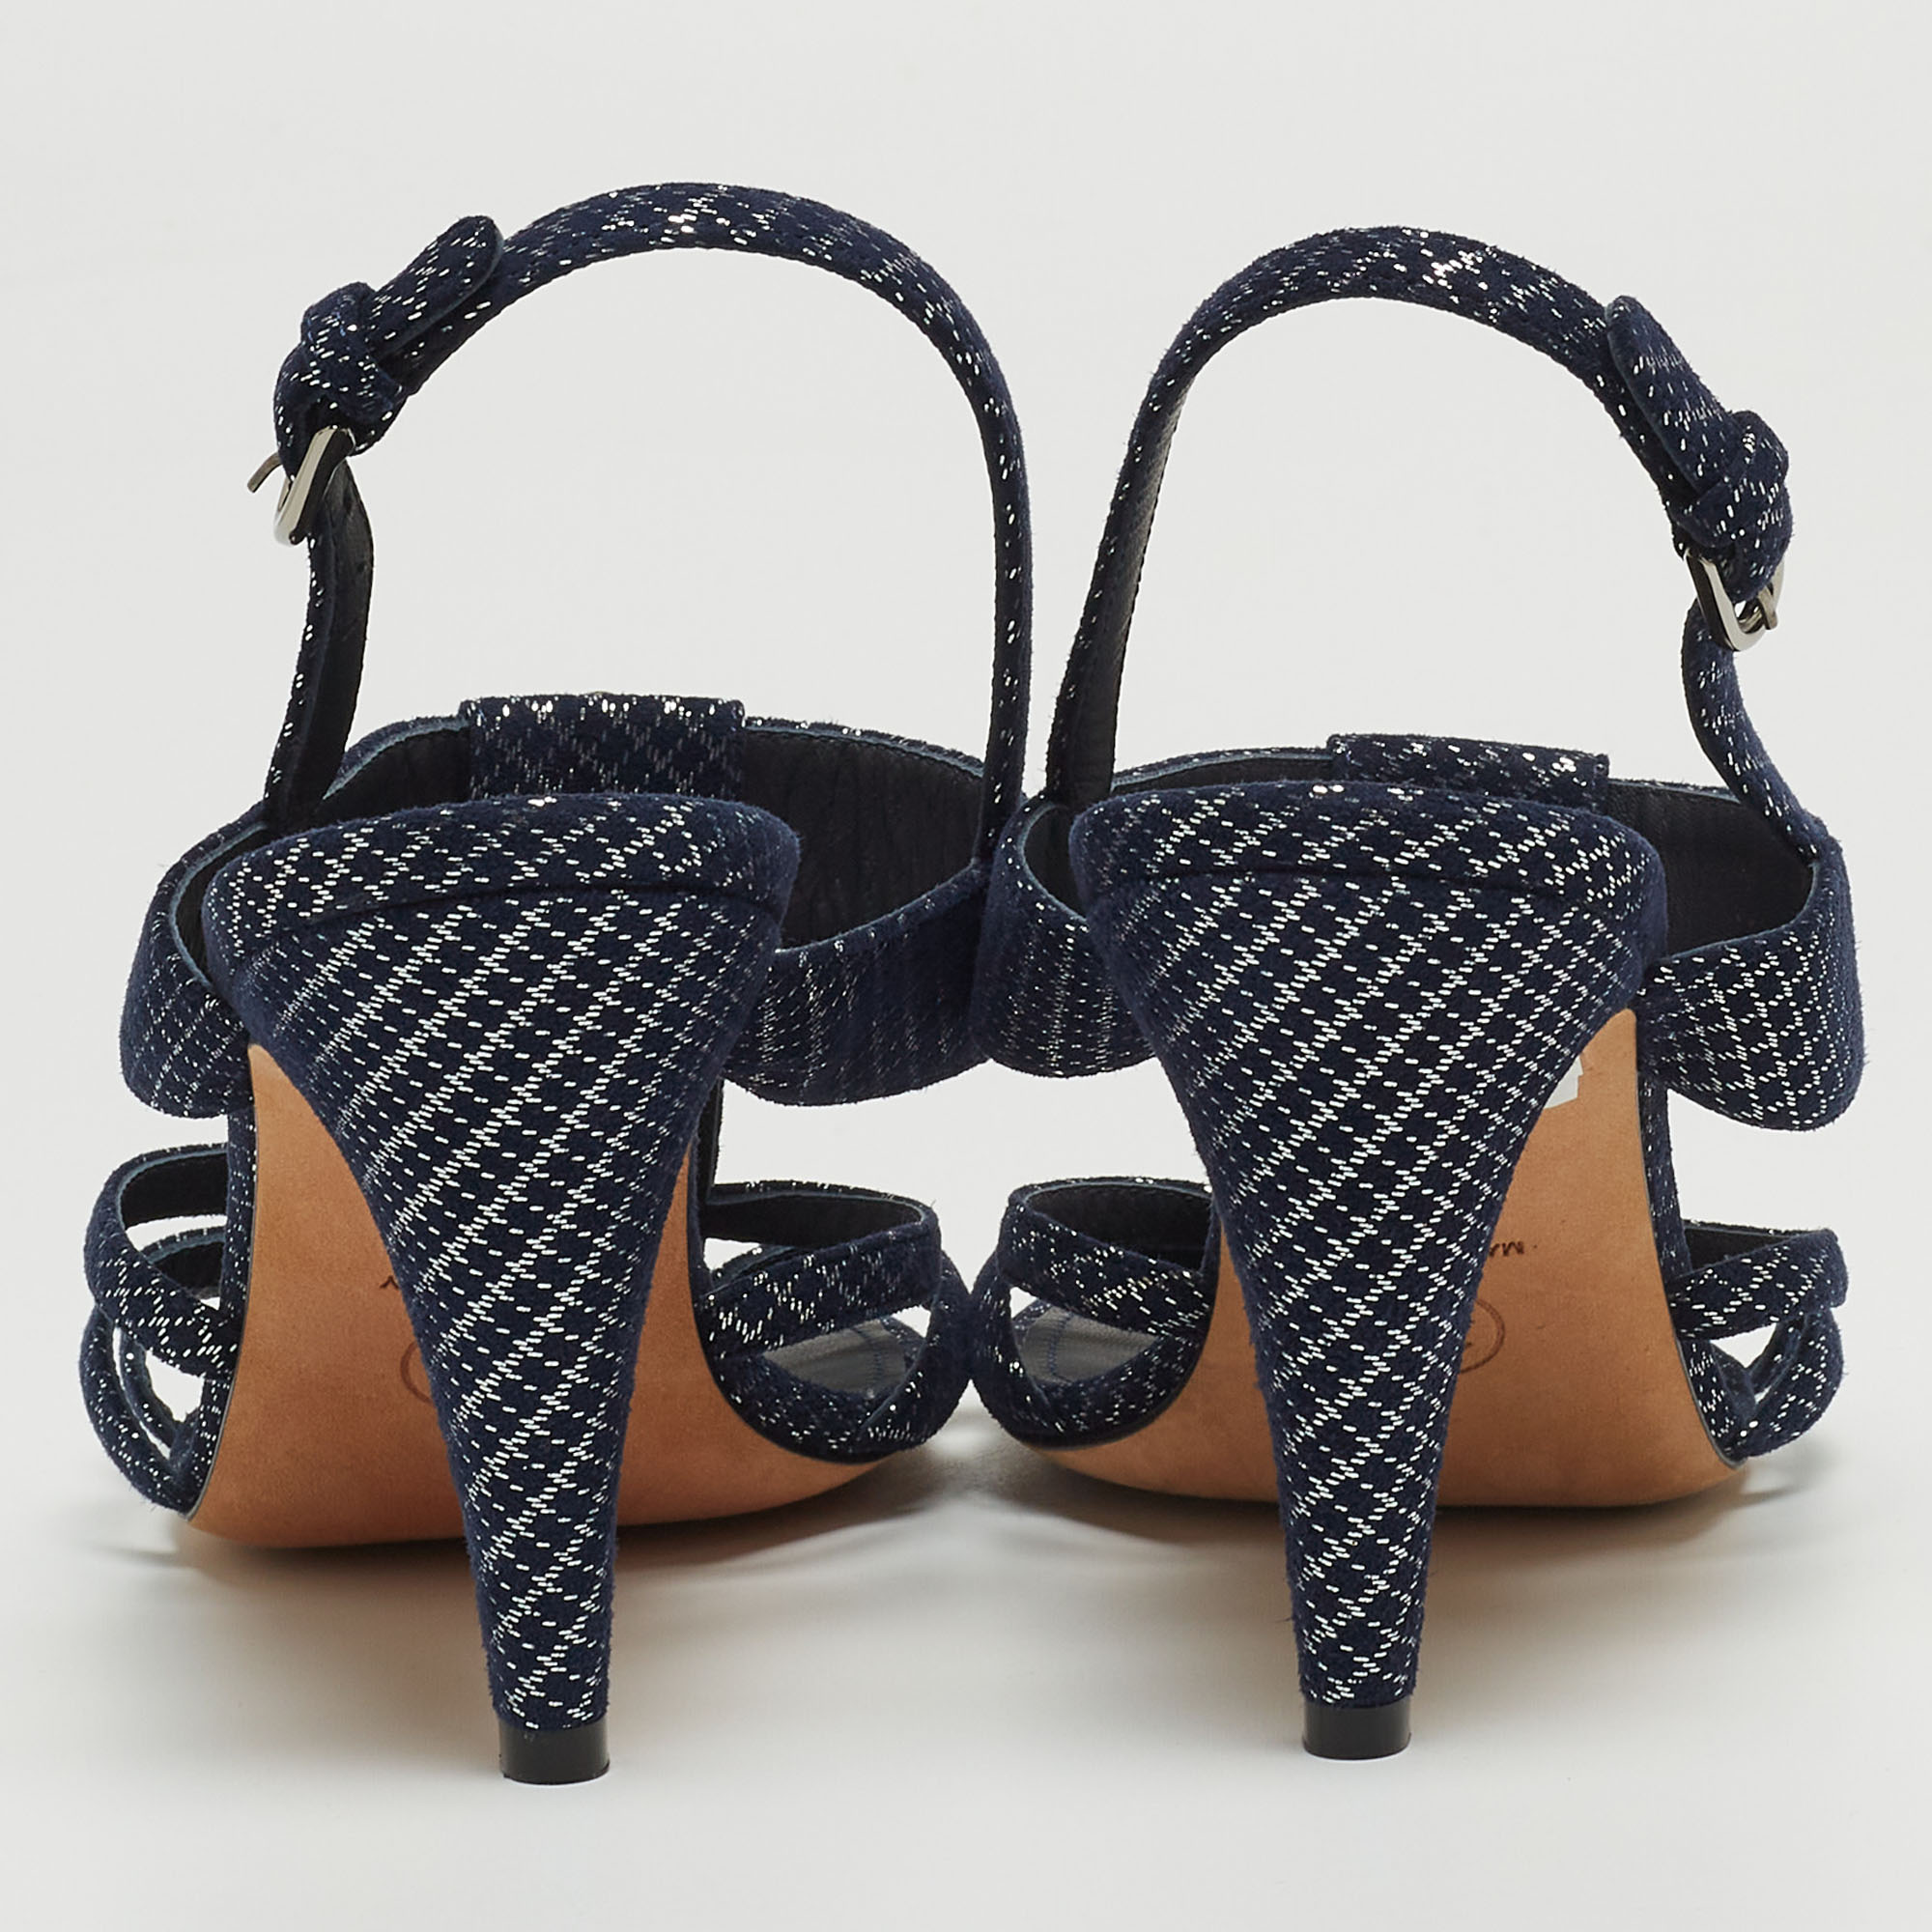 Chanel Navy Blue Textured Suede Faux Pearl Embellished Slingback Sandals Size 38